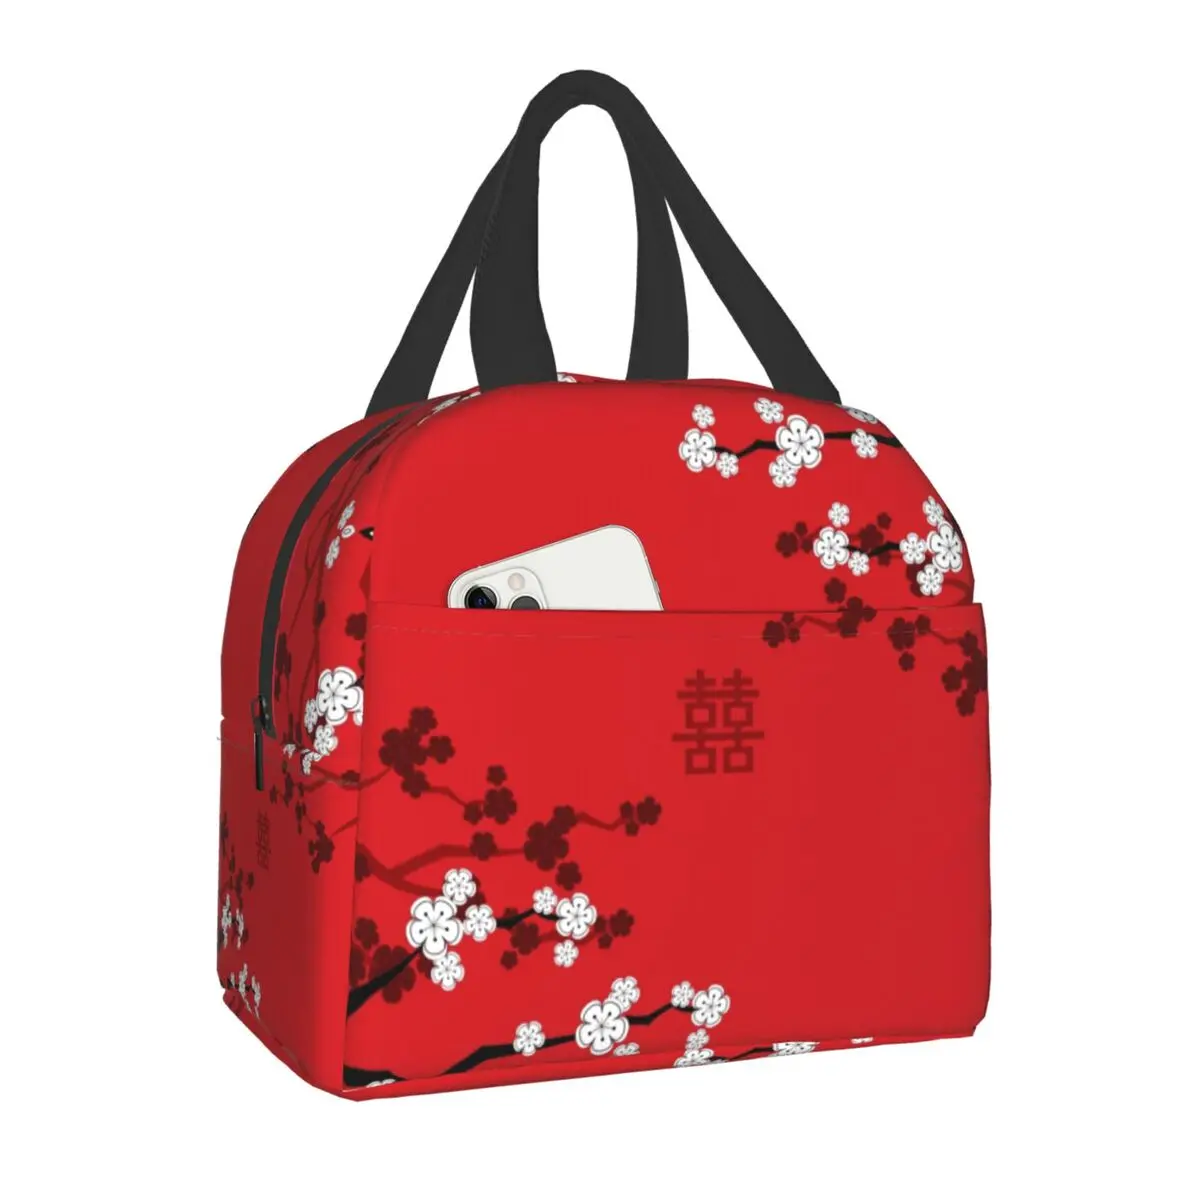 

Oriental Cherry Blossoms Insulated Lunch Bags for Women Kids School Resuable Thermal Warm Cooler Food Japanese Sakura Lunch Box